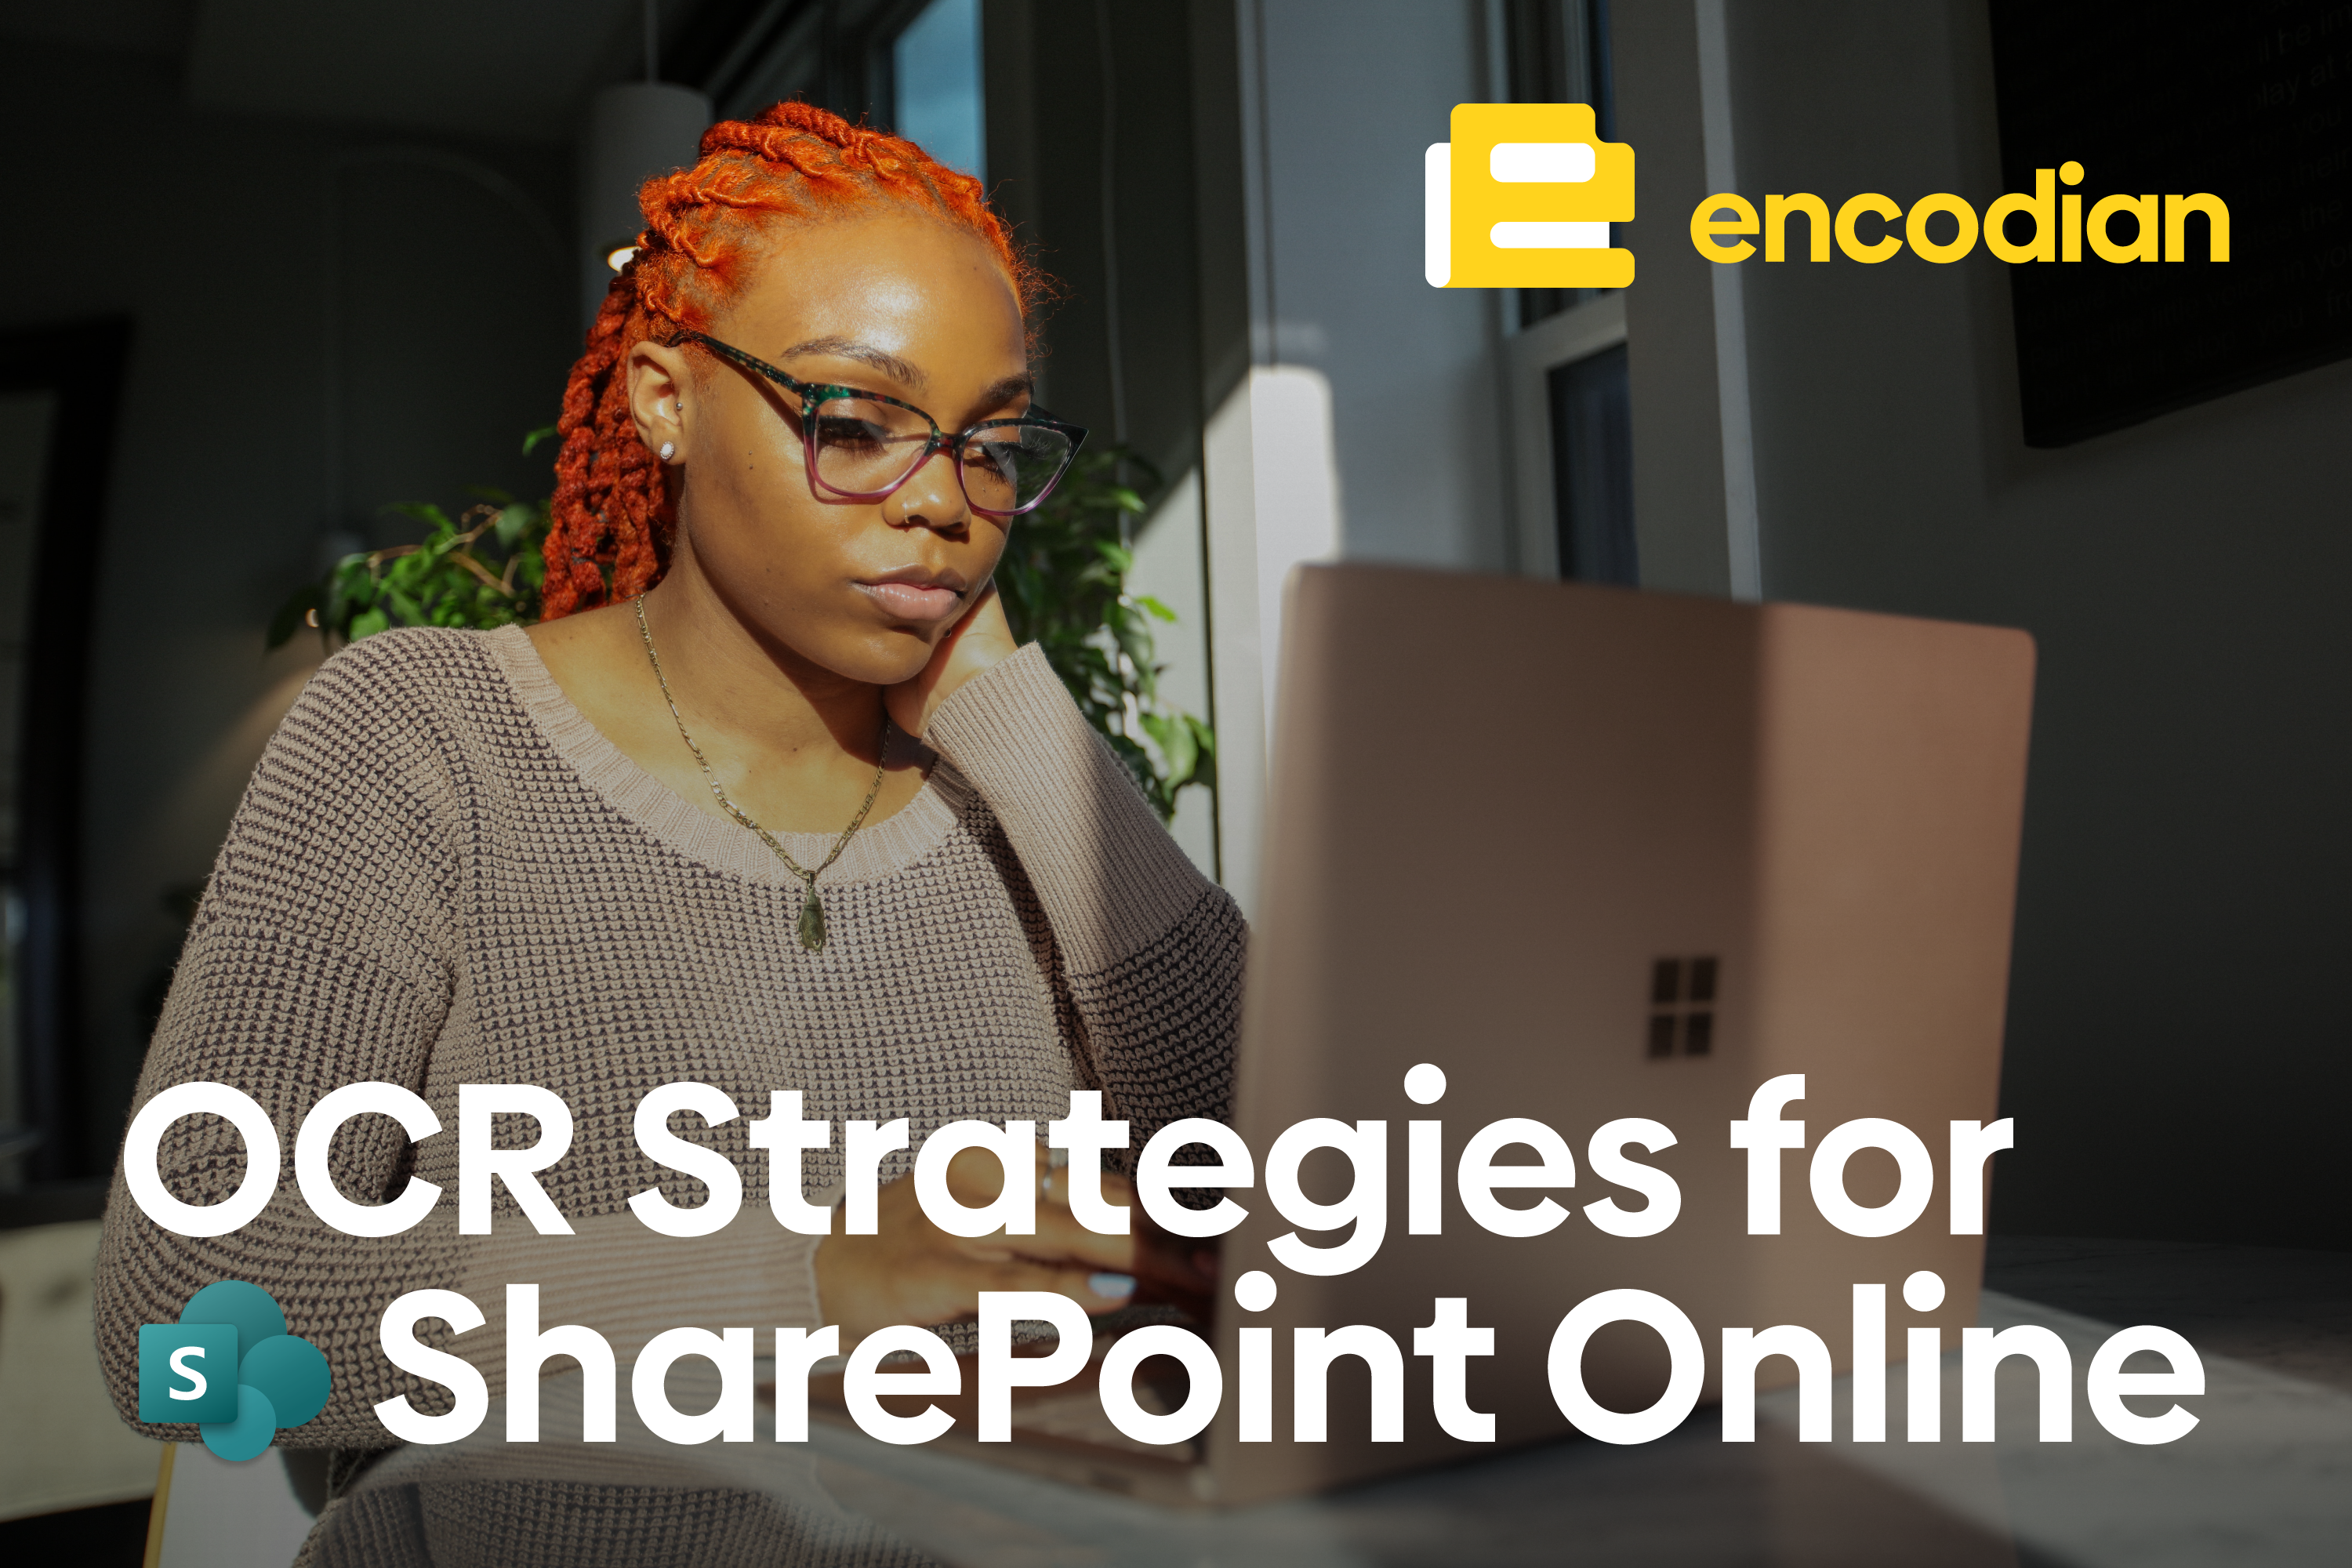 "OCR Strategies for SharePoint Online" on an image of a young black woman working at a computer